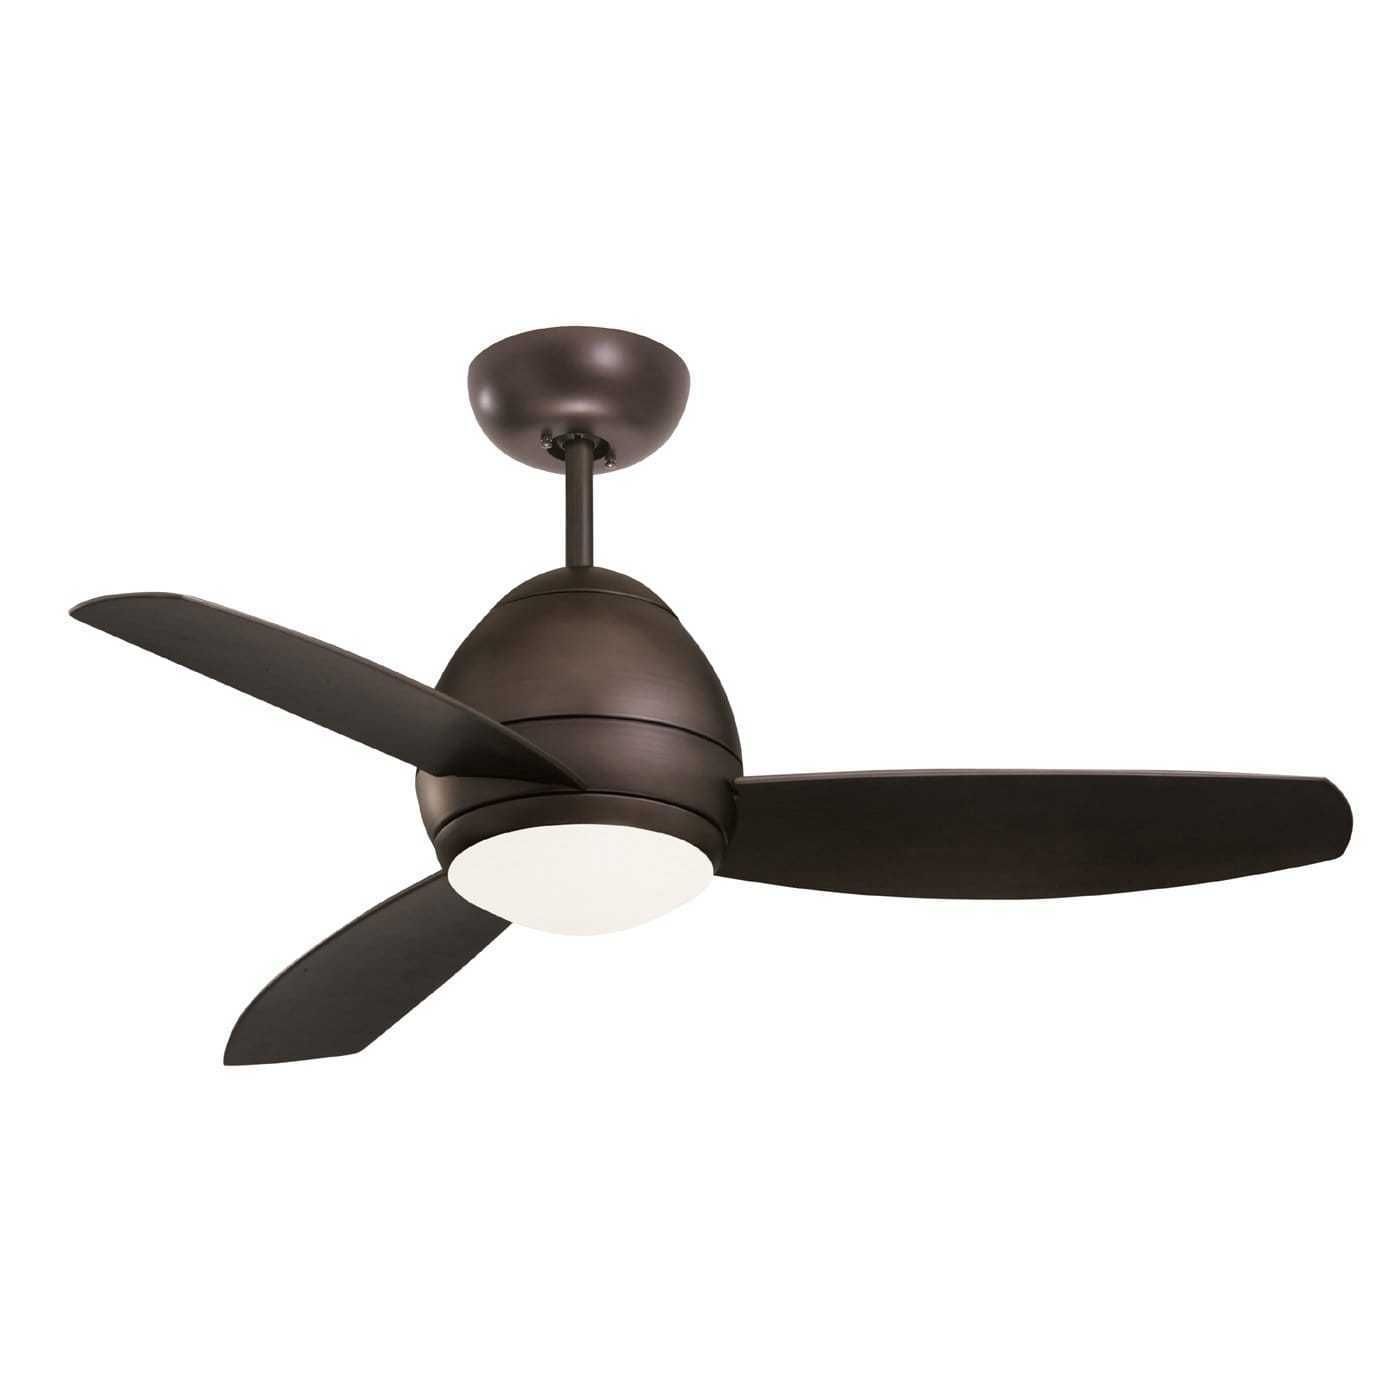 Emerson Cf252orb Curva Oil Rubbed Bronze 52" Outdoor Ceiling Fan For Outdoor Ceiling Fans With Lights At Ebay (Photo 8 of 15)